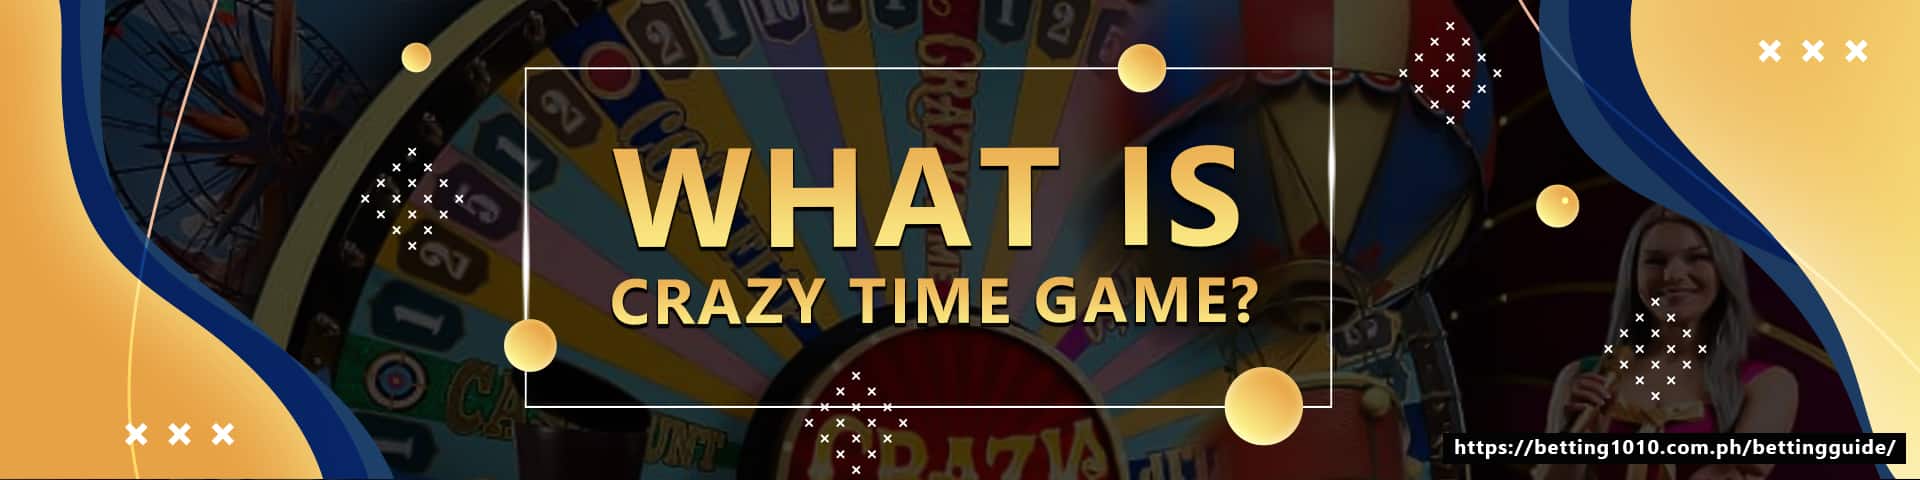 What is Crazy time?